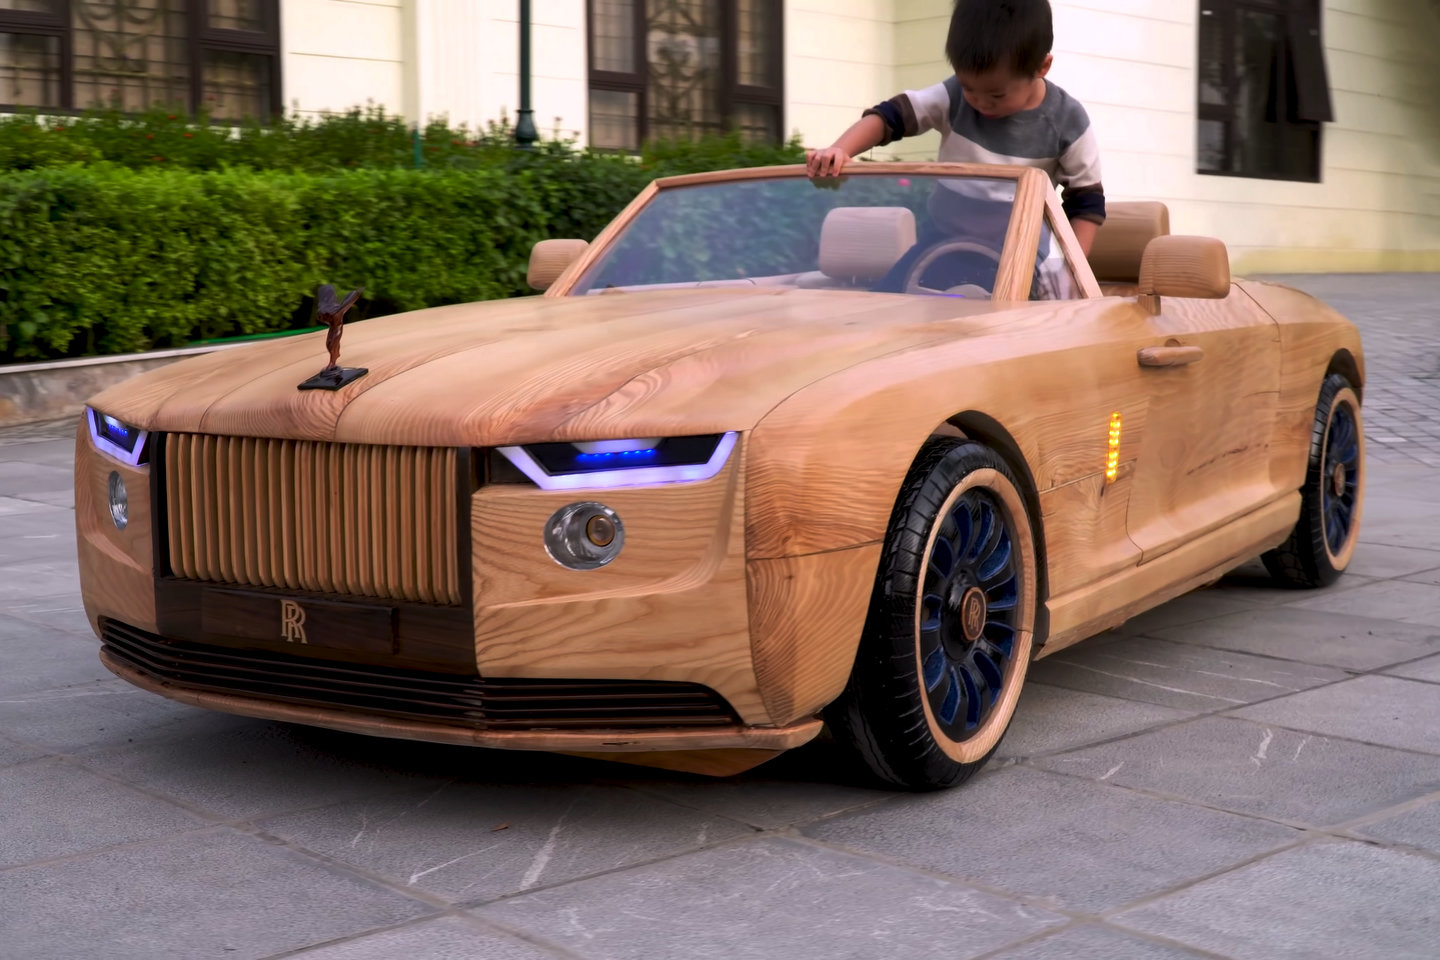 https://www.yankodesign.com/images/design_news/2022/01/father-of-the-year-builds-a-realistic-rolls-royce-boat-tail-replica-out-of-wood-for-his-son-to-drive/rolls_royce_boat_tail_nd_woodworking_art_1.jpg